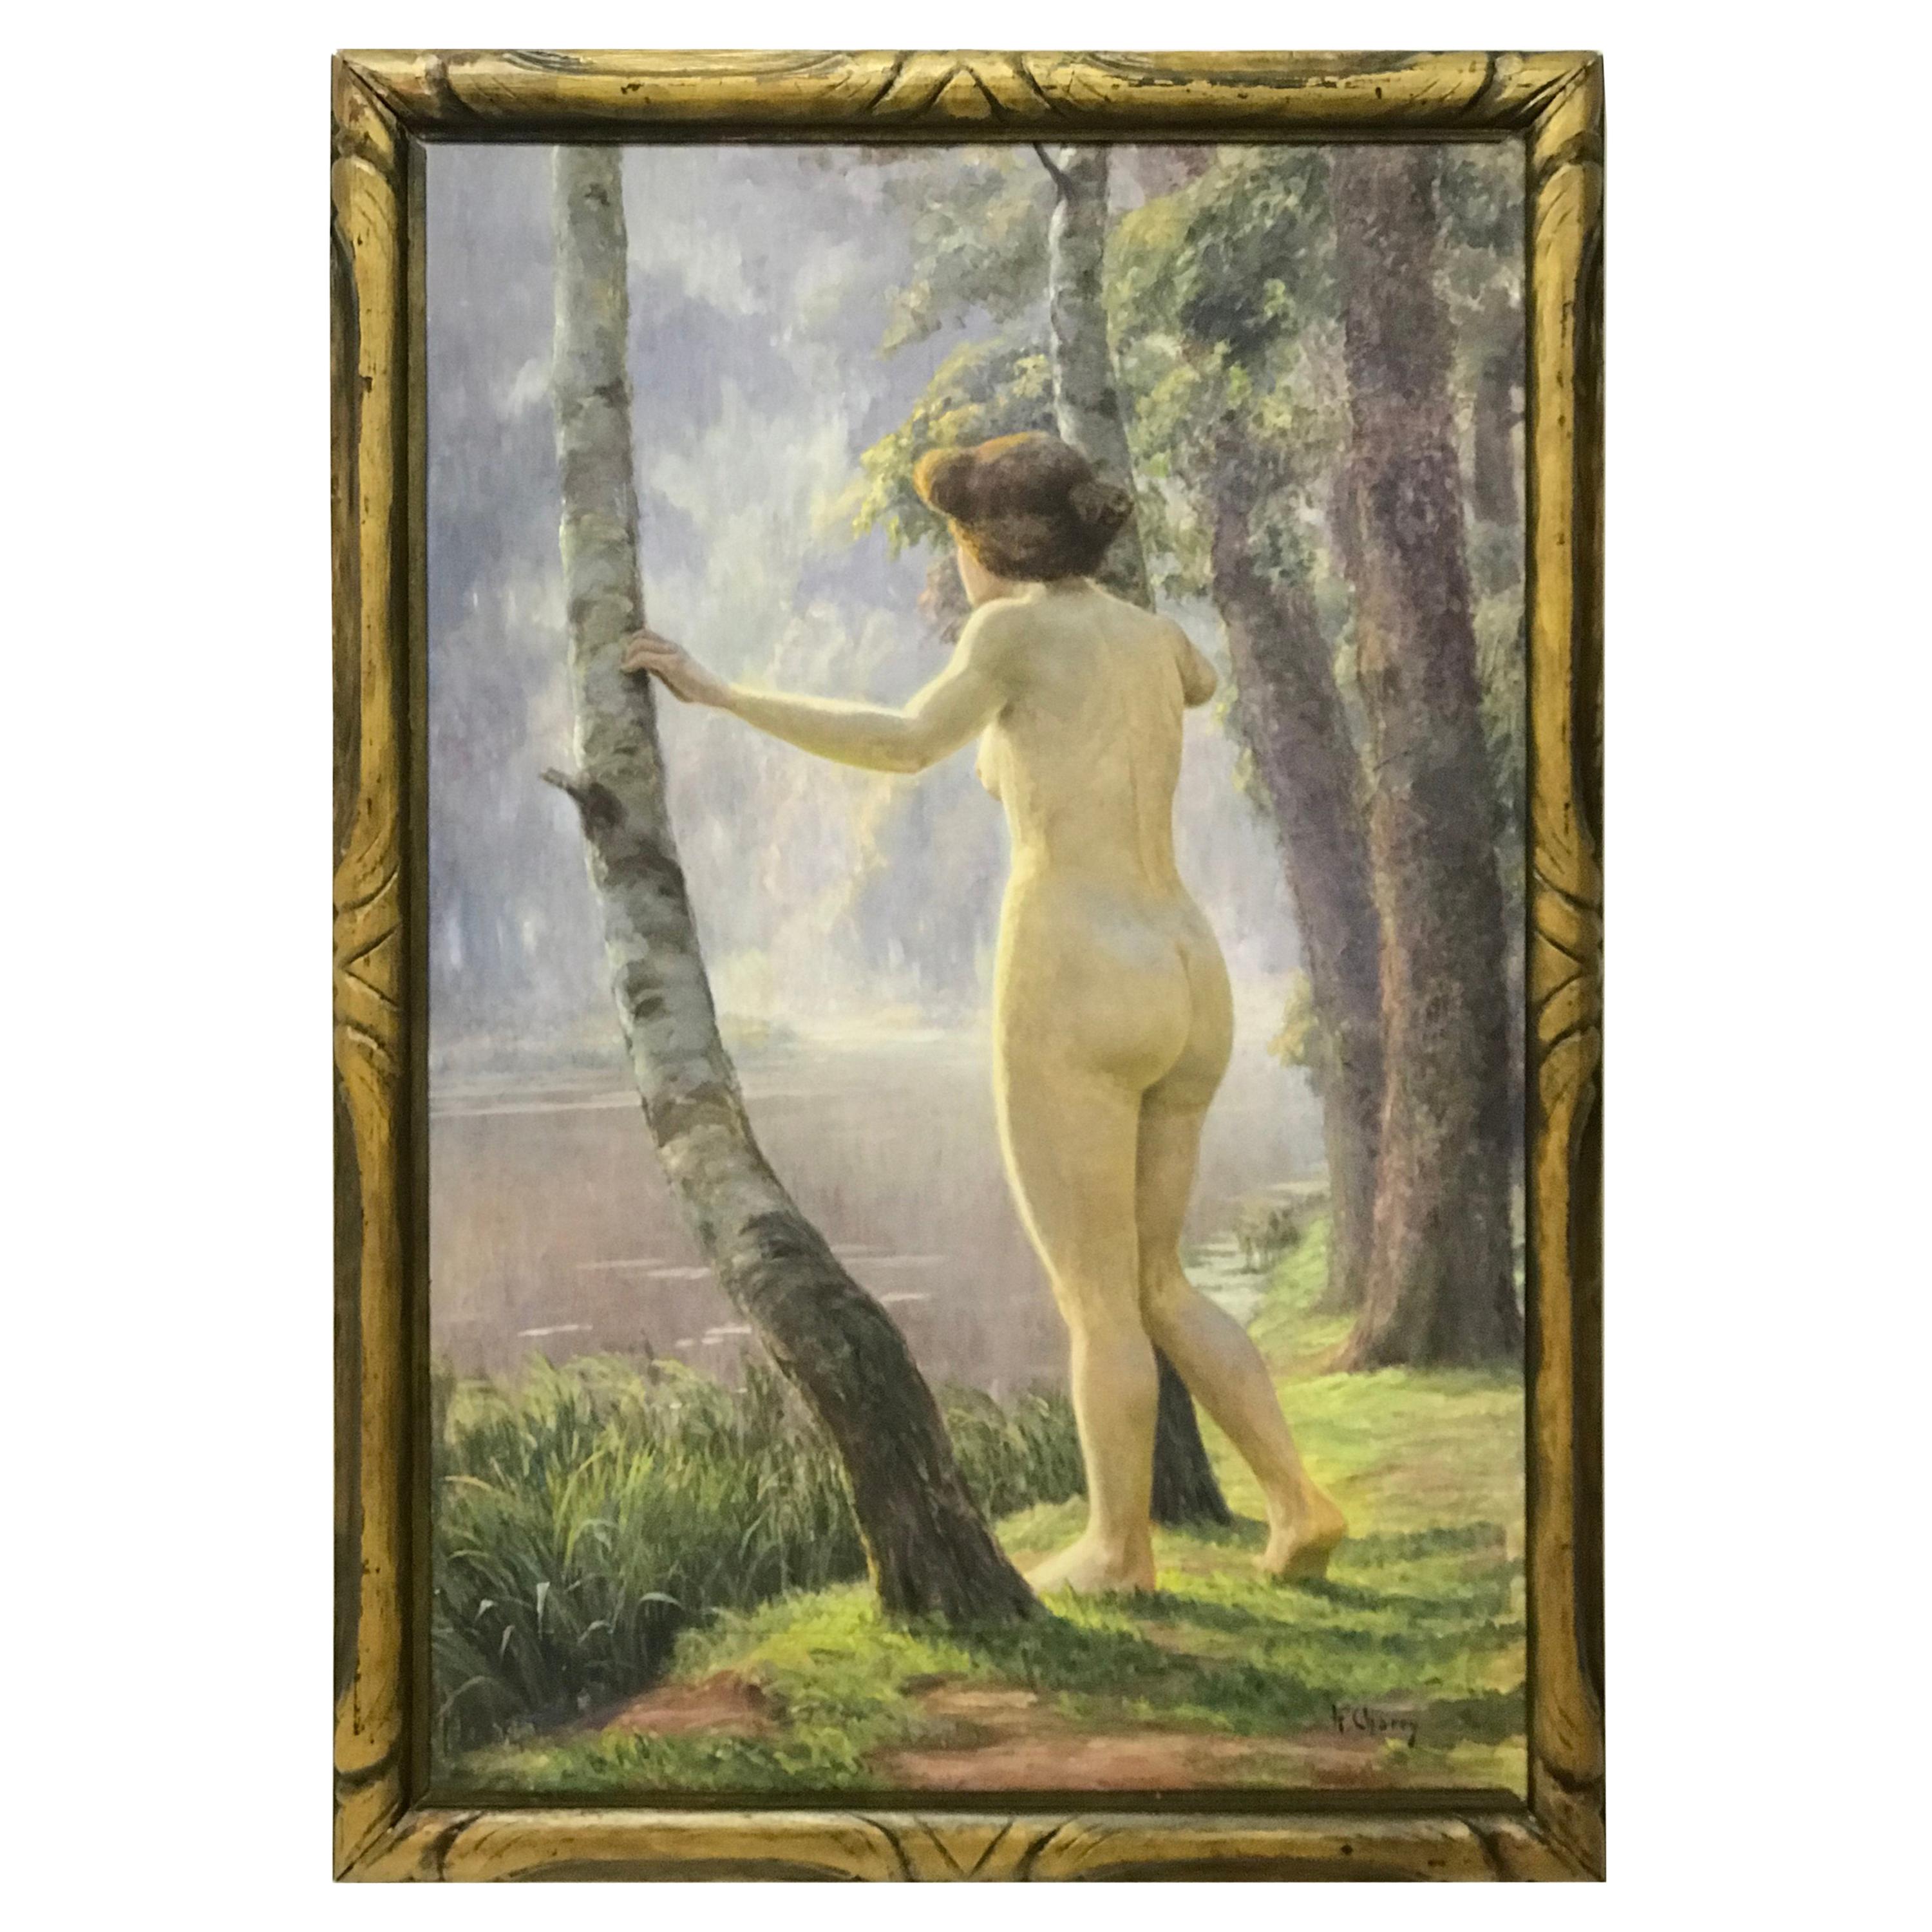 H. Charry, “By The Lake”, 1930 Painting For Sale